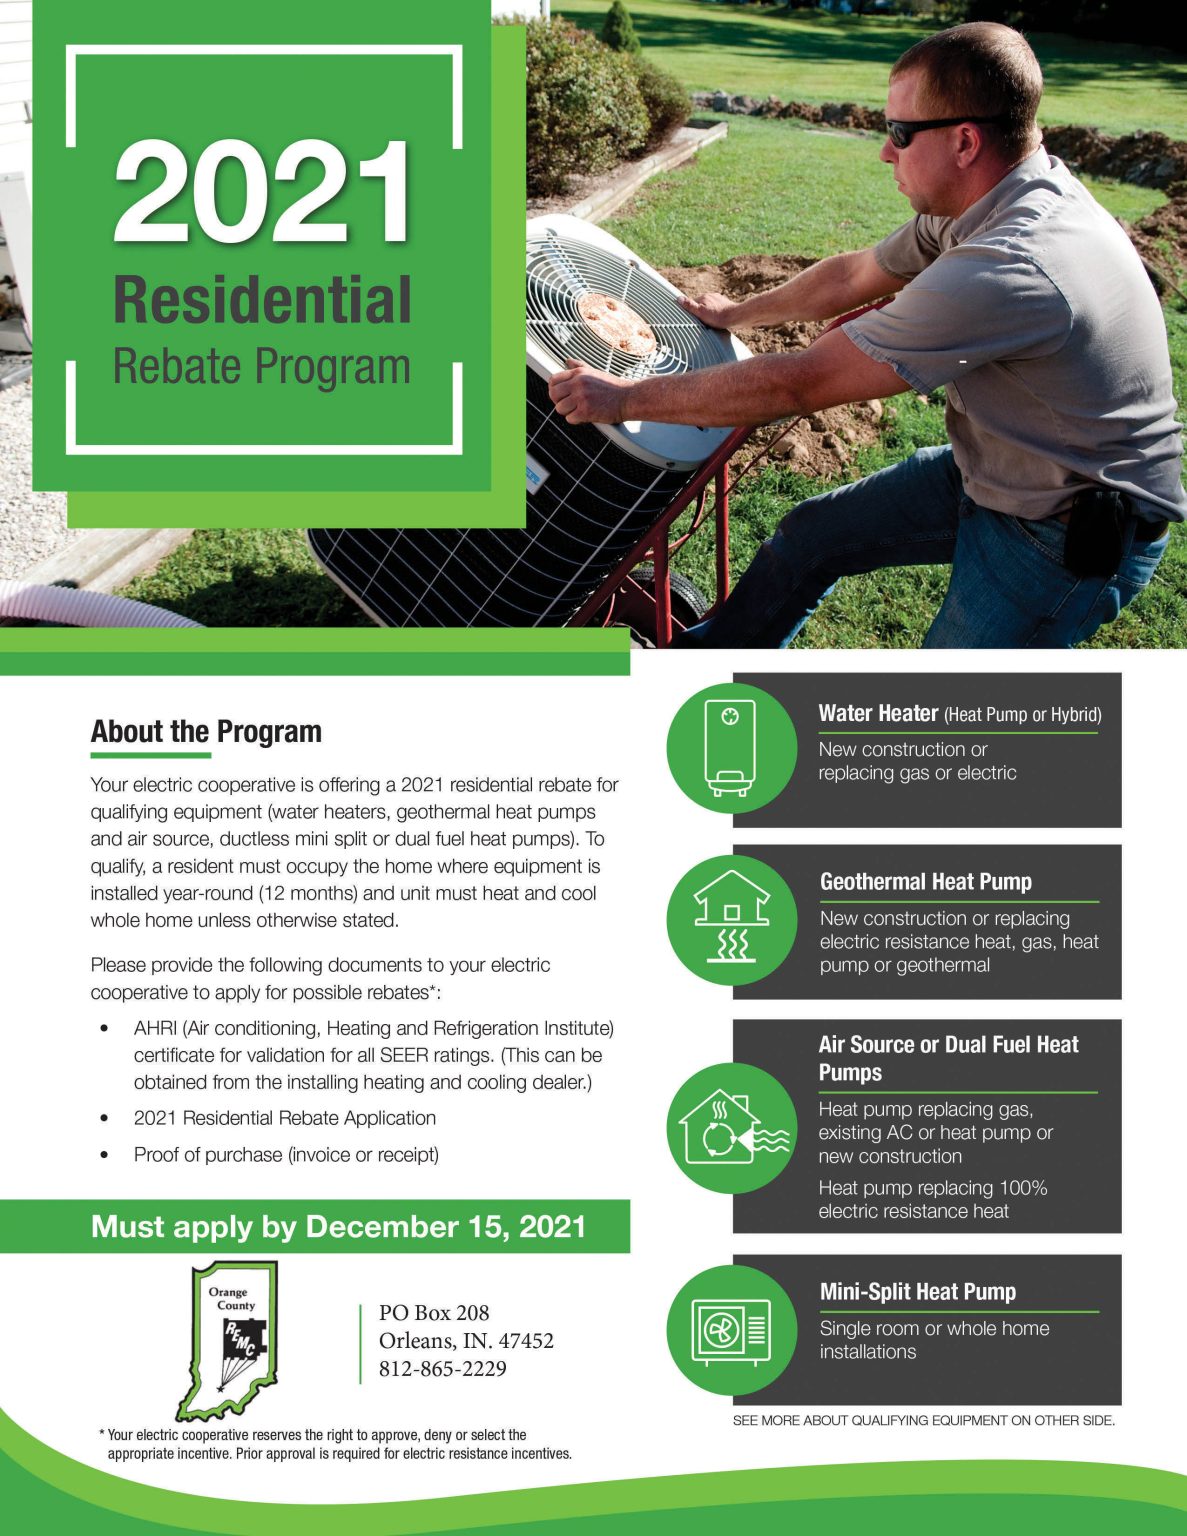 2021-residential-rebate-program-indiana-connection